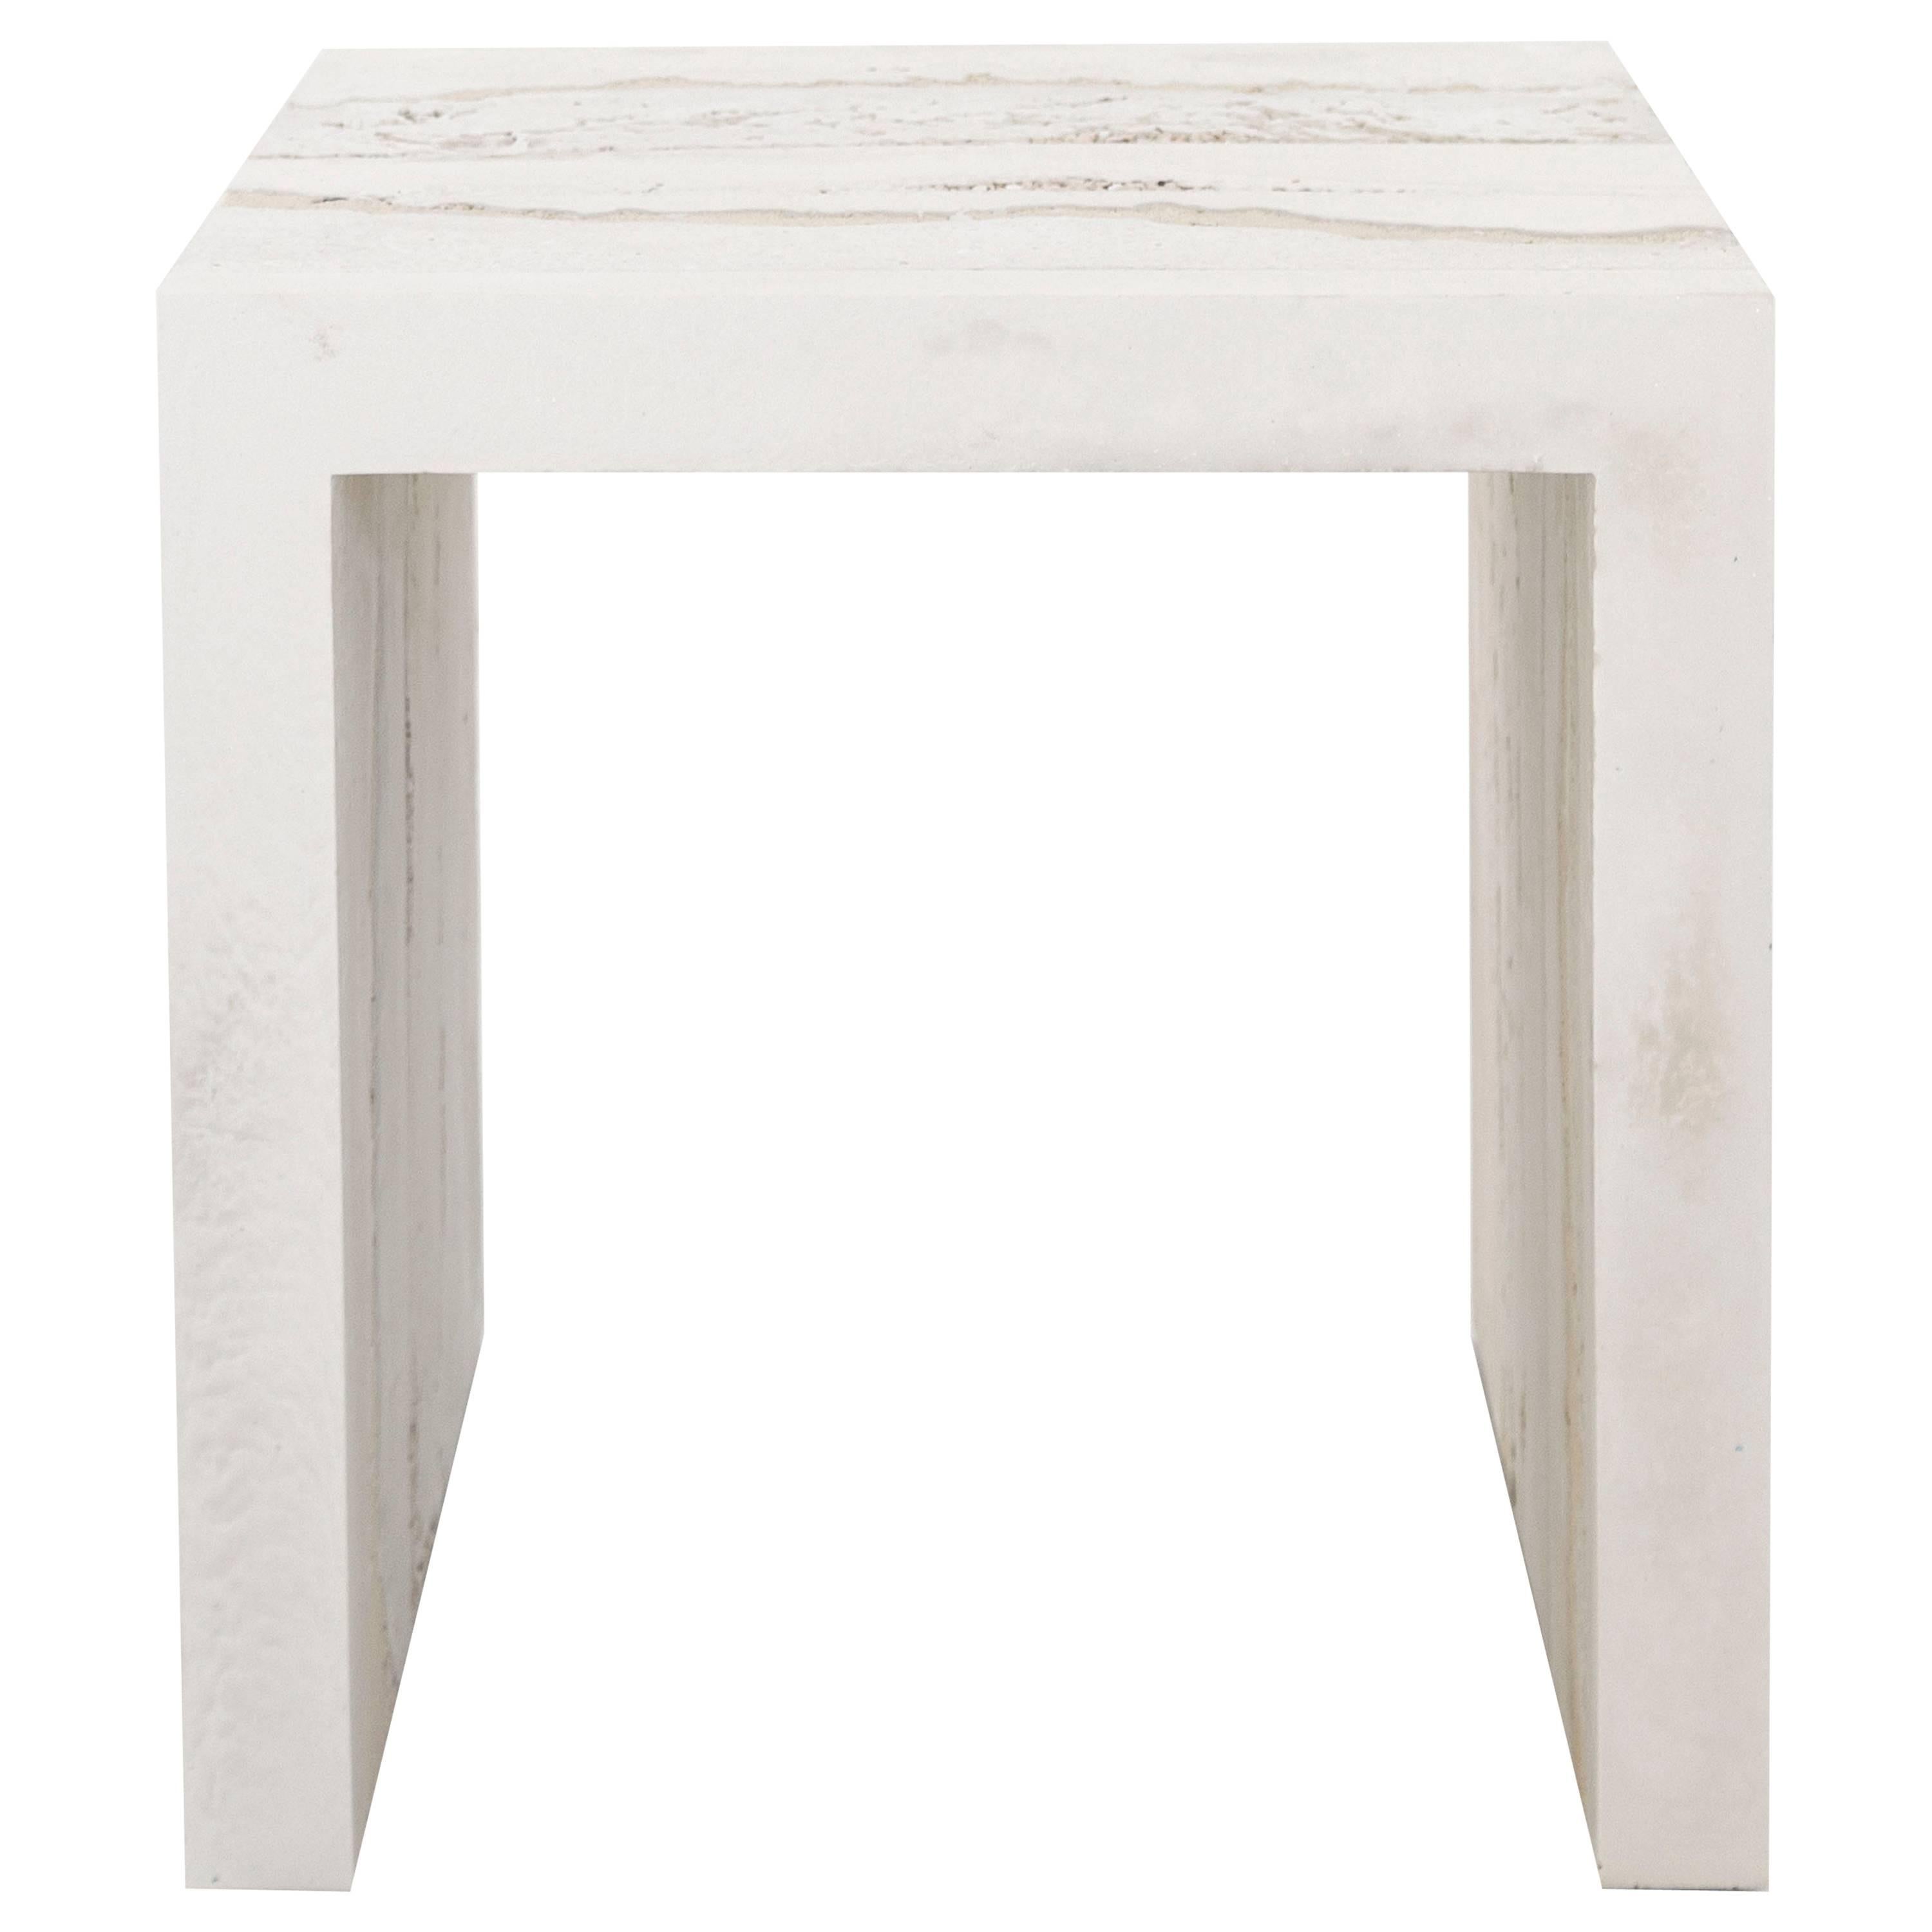 This side table consists of a hand-dyed cream cement, crushed porcelain, and tan sand. The aggregates are packed within the cement cast in an organic nature. Custom options available, please inquire with the studio.